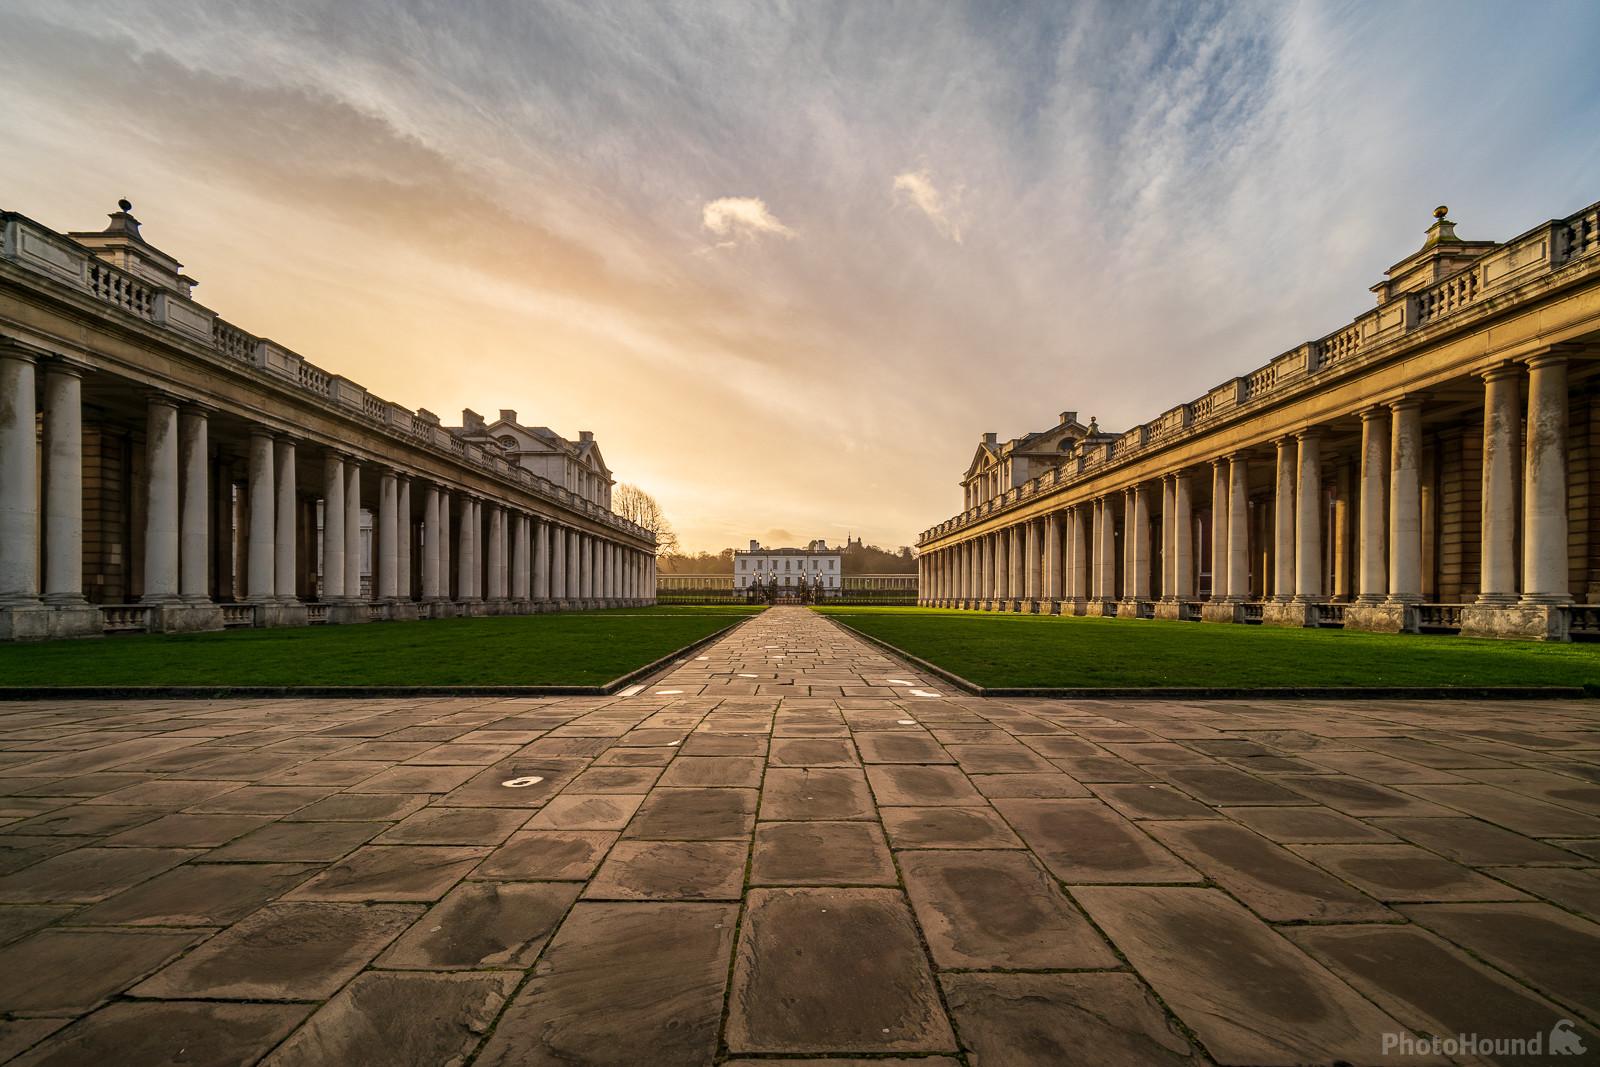 Image of The Old Royal Naval College, Greenwich by James Billings.